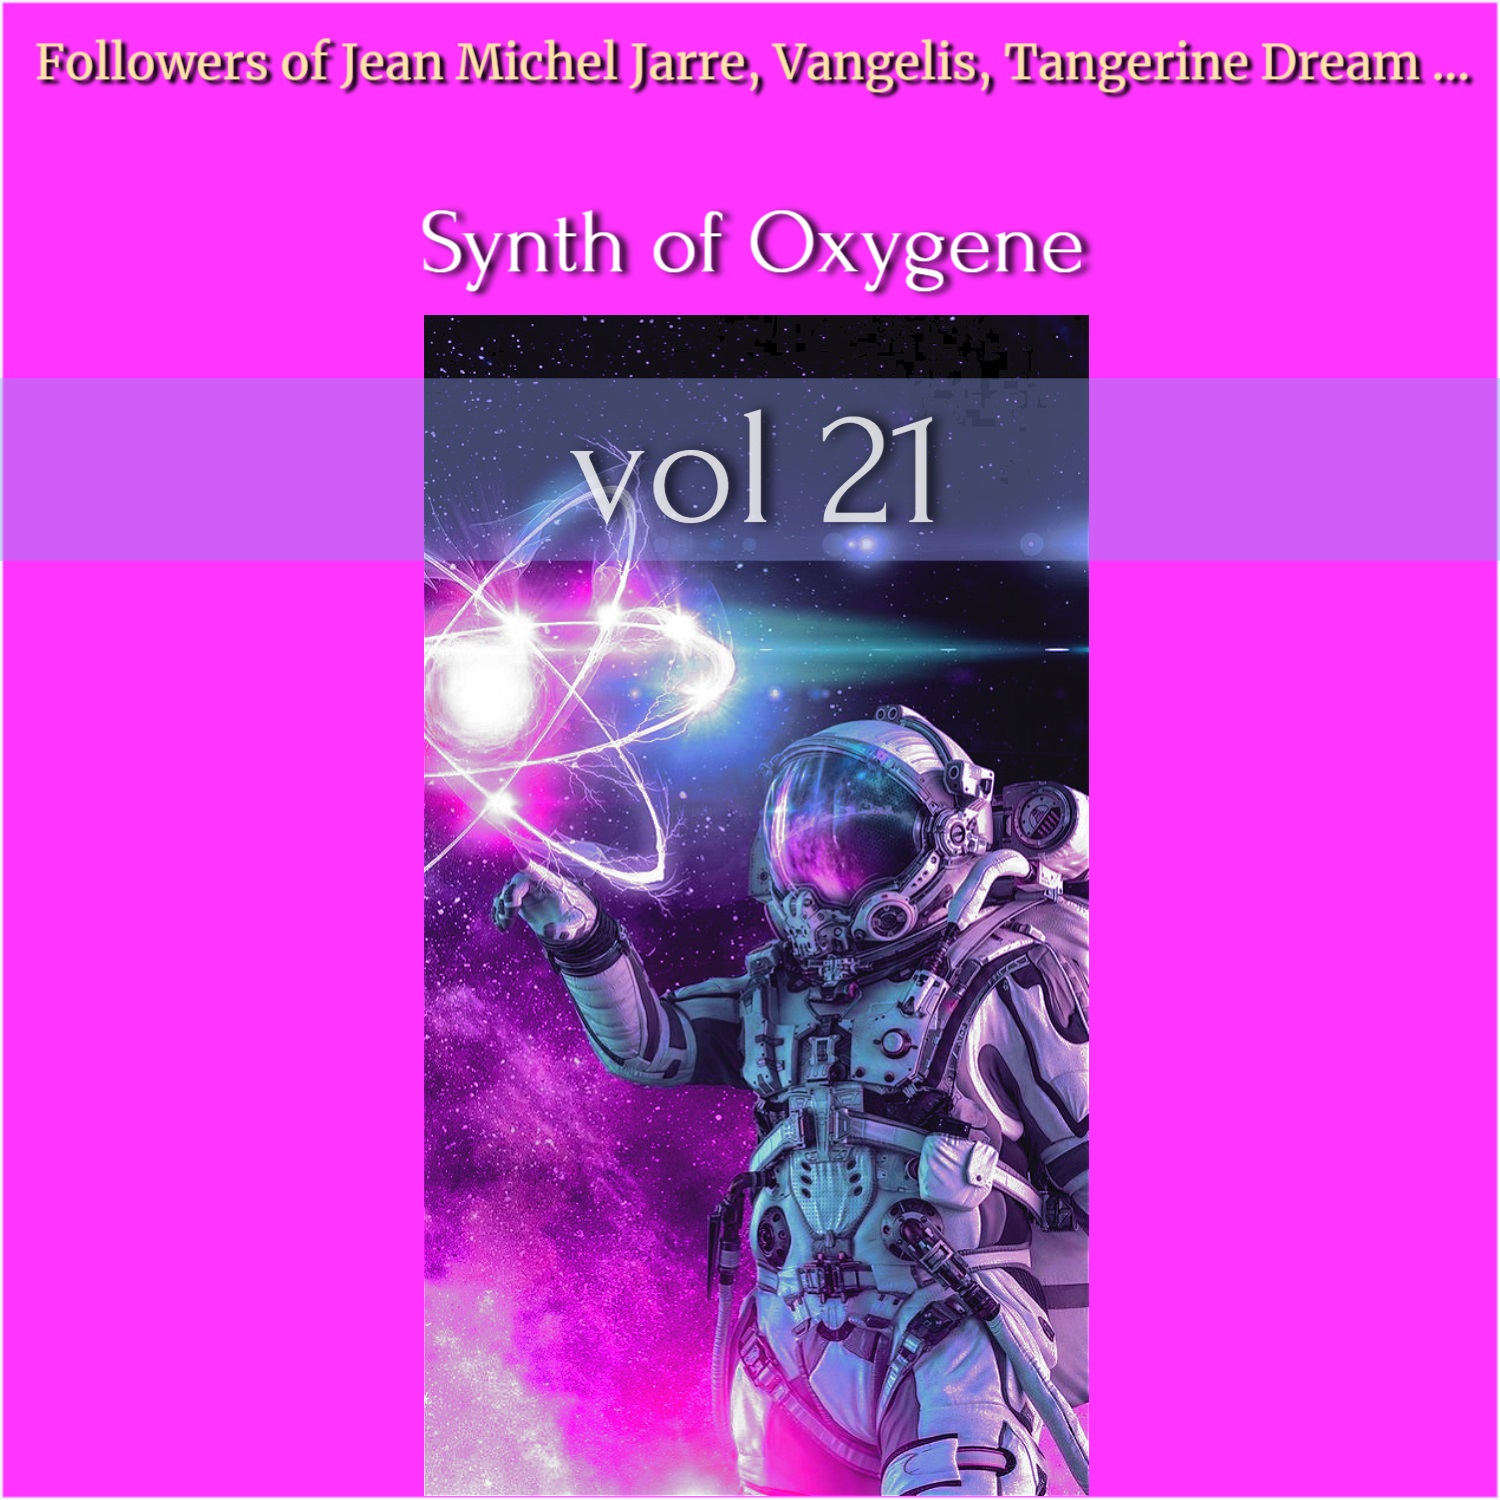 Synth of Oxygene vol 21 -MP3 320Kbit Space Music-Synth wave-Newage